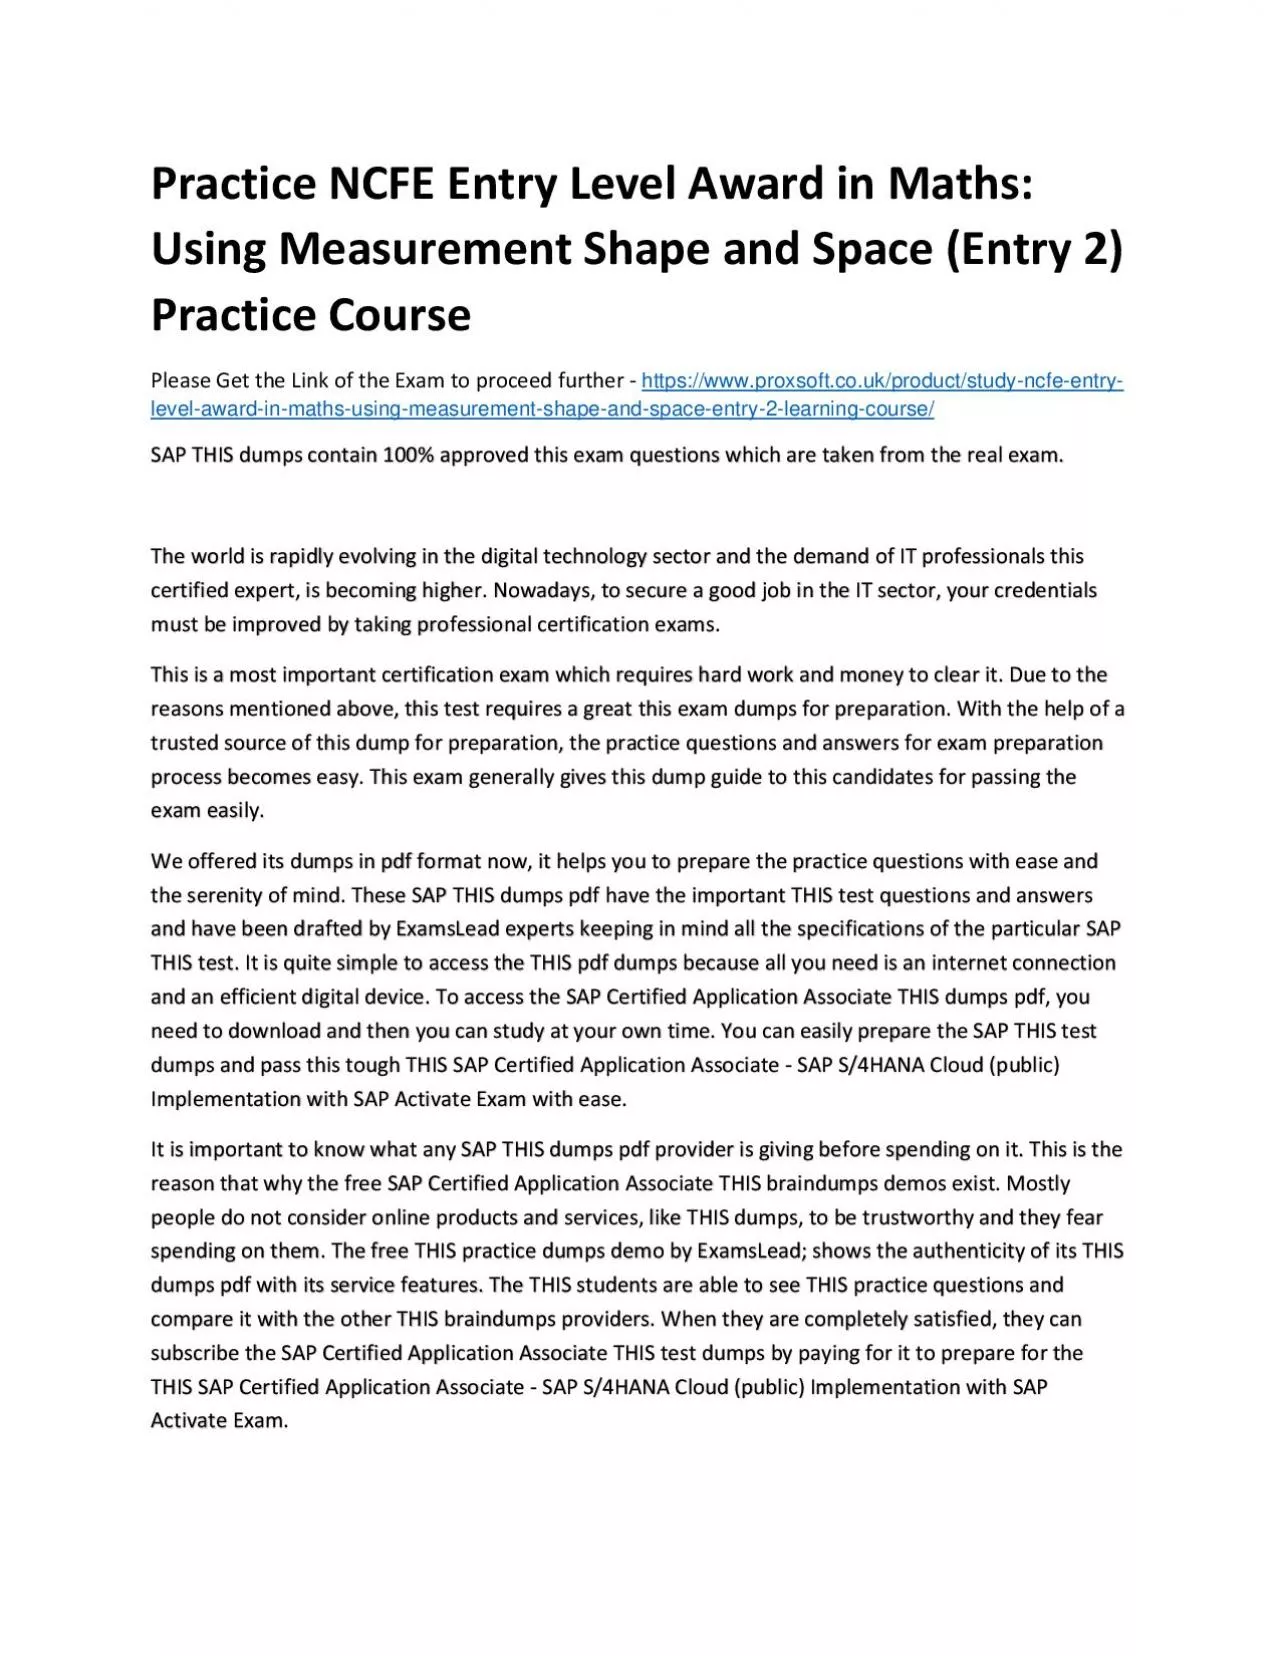 Practice NCFE Entry Level Award in Maths: Using Measurement Shape and Space (Entry 2)